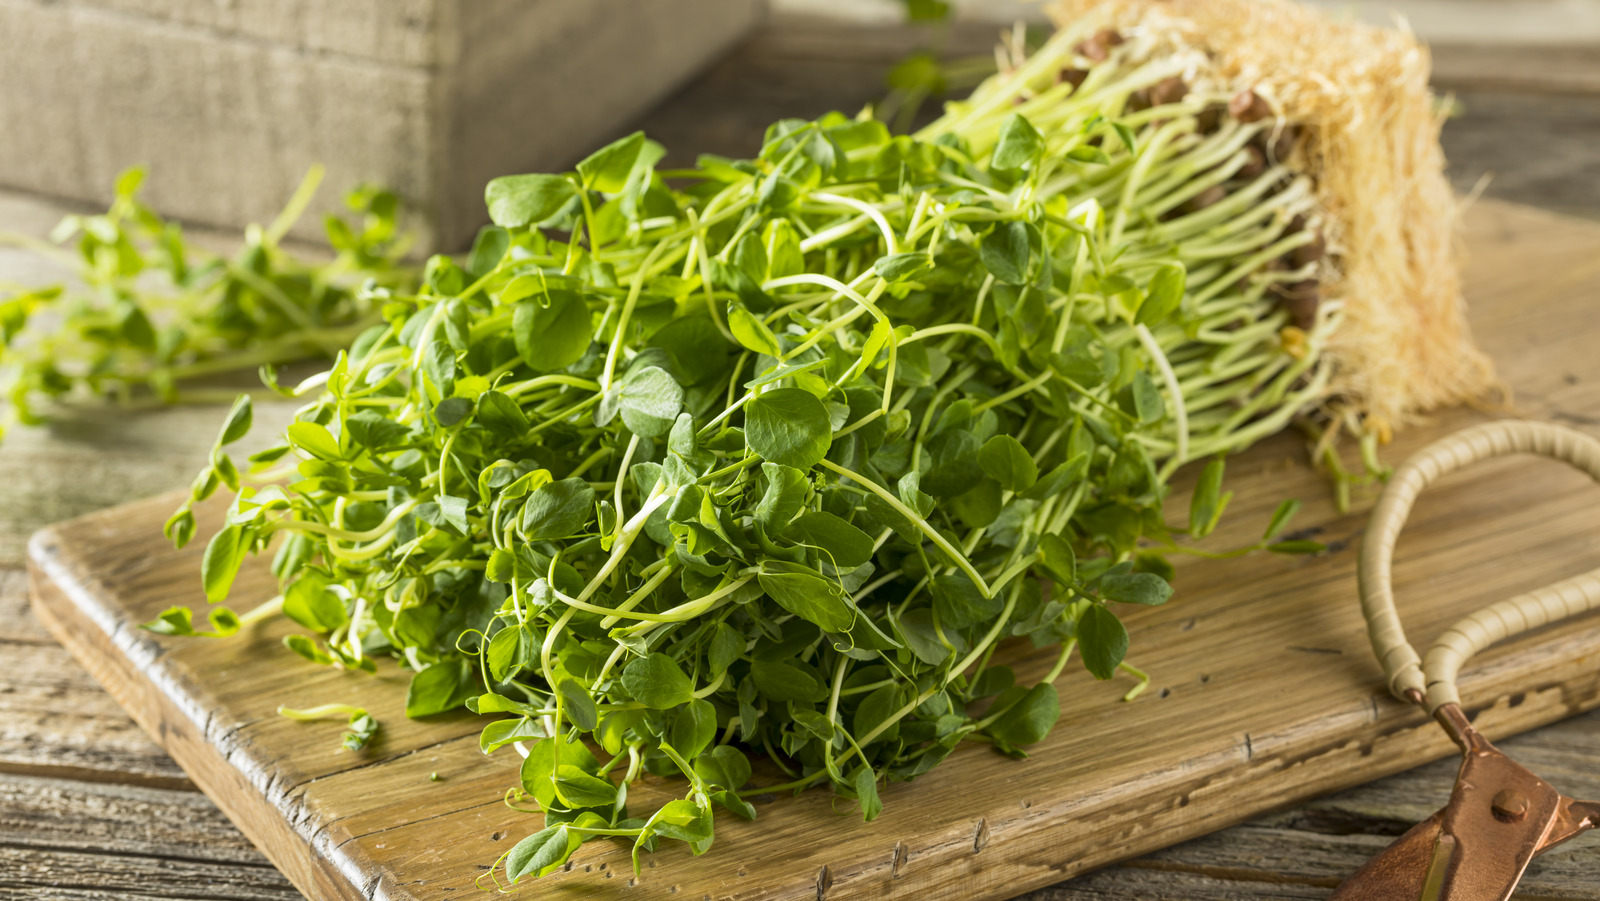 What Are Pea Shoots And Can You Eat Them Raw?